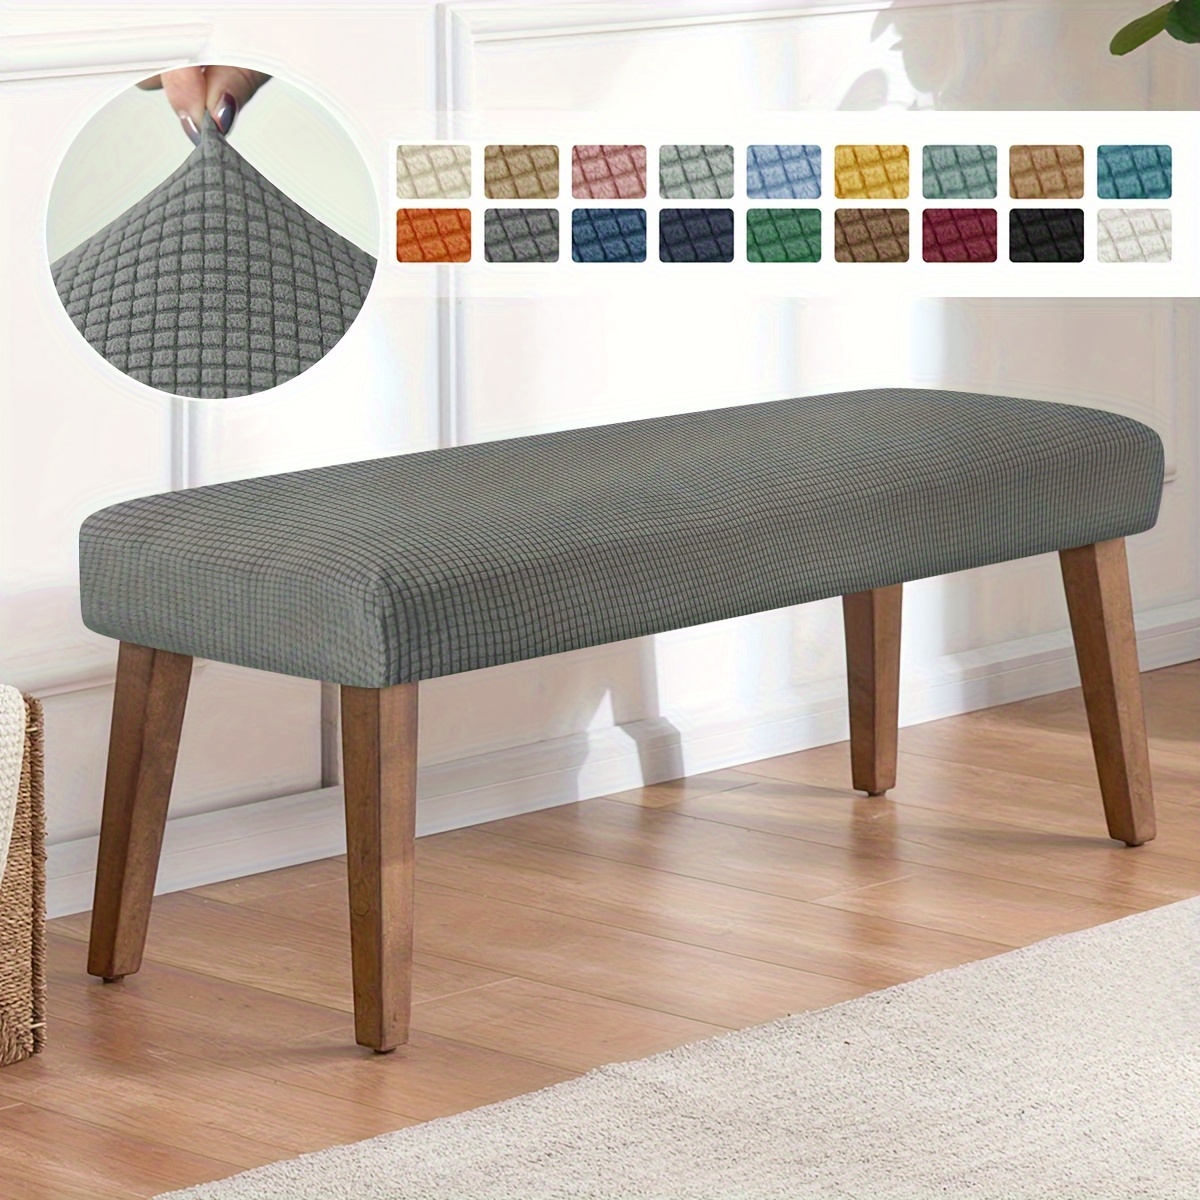 

1pc Long Bench Cover, Stretch Bench Slipcover, Stool Cover Bench Protector, For Home, Hotel, Living Room, Bedroom, Home Decor